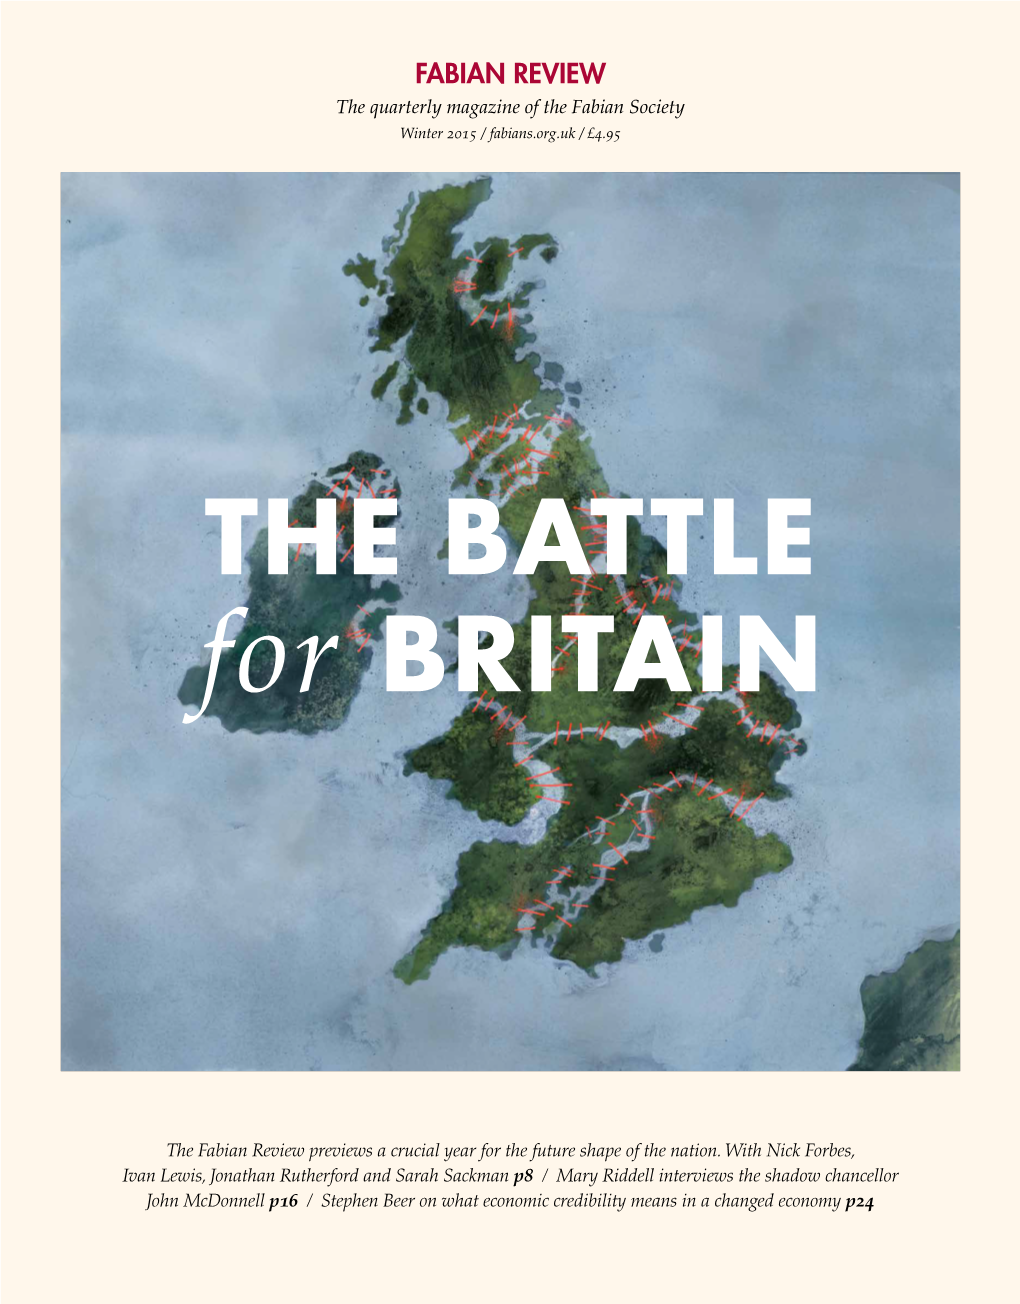 THE BATTLE for BRITAIN